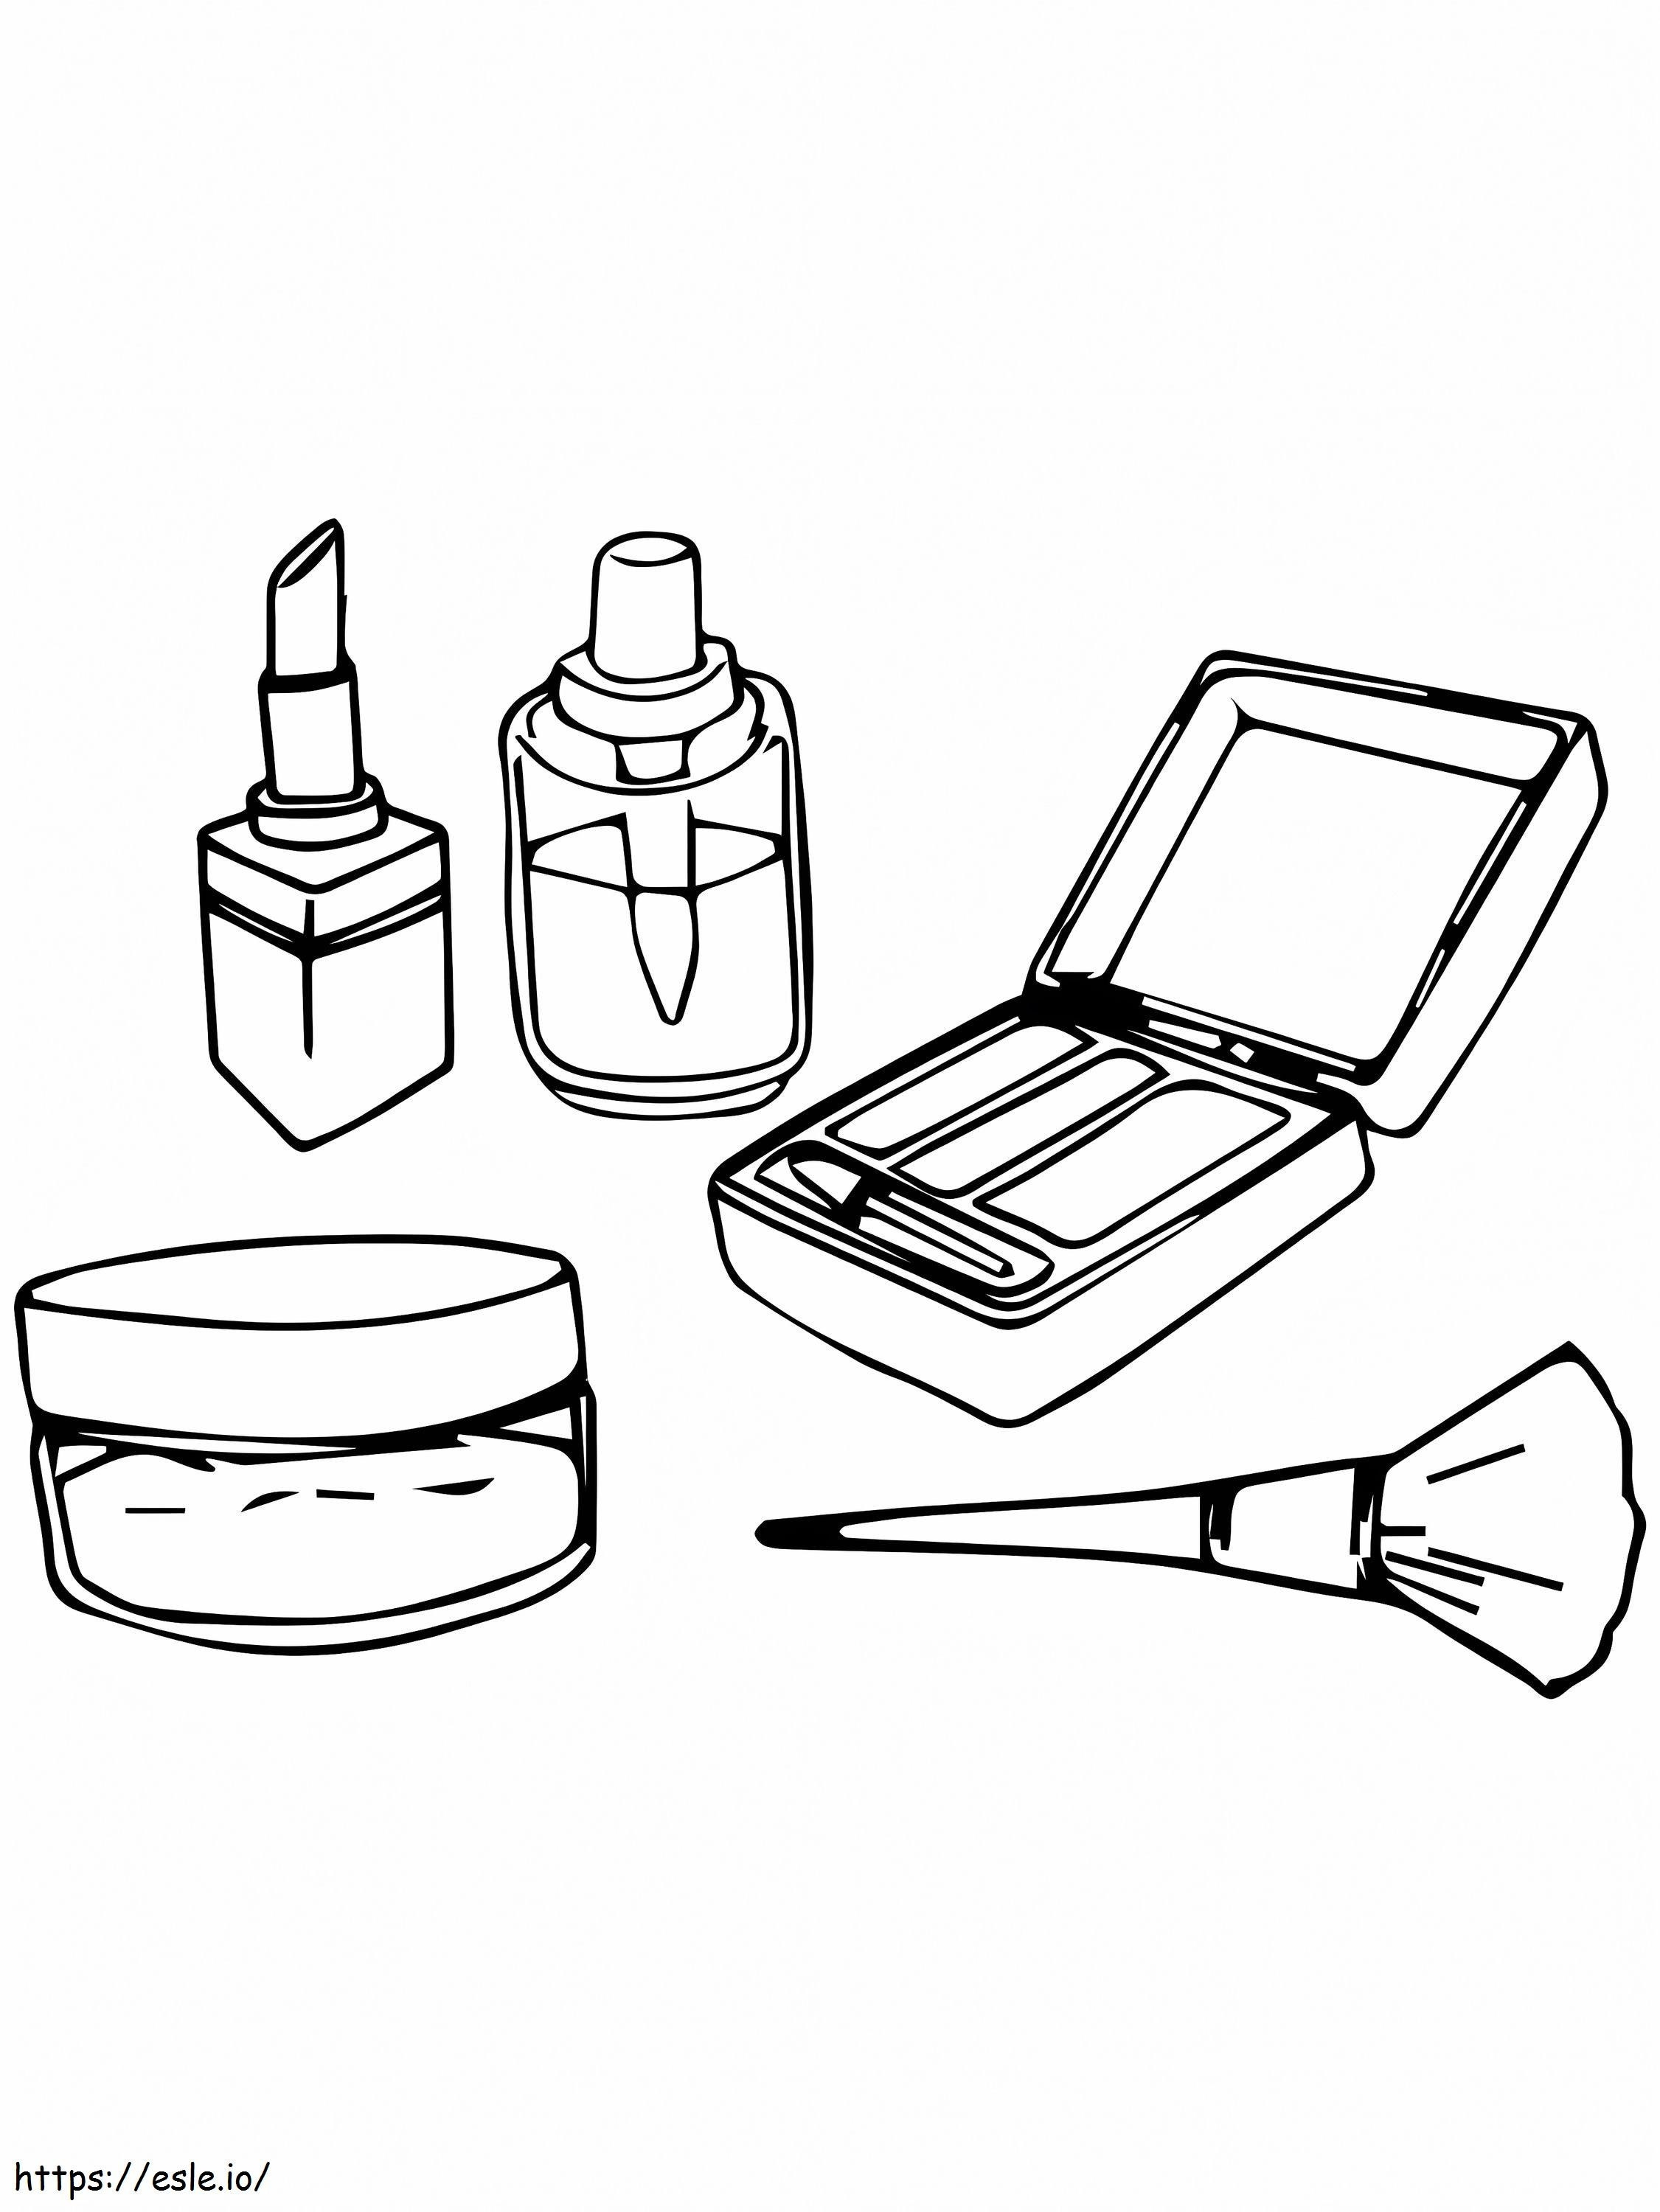 Makeup 4 coloring page